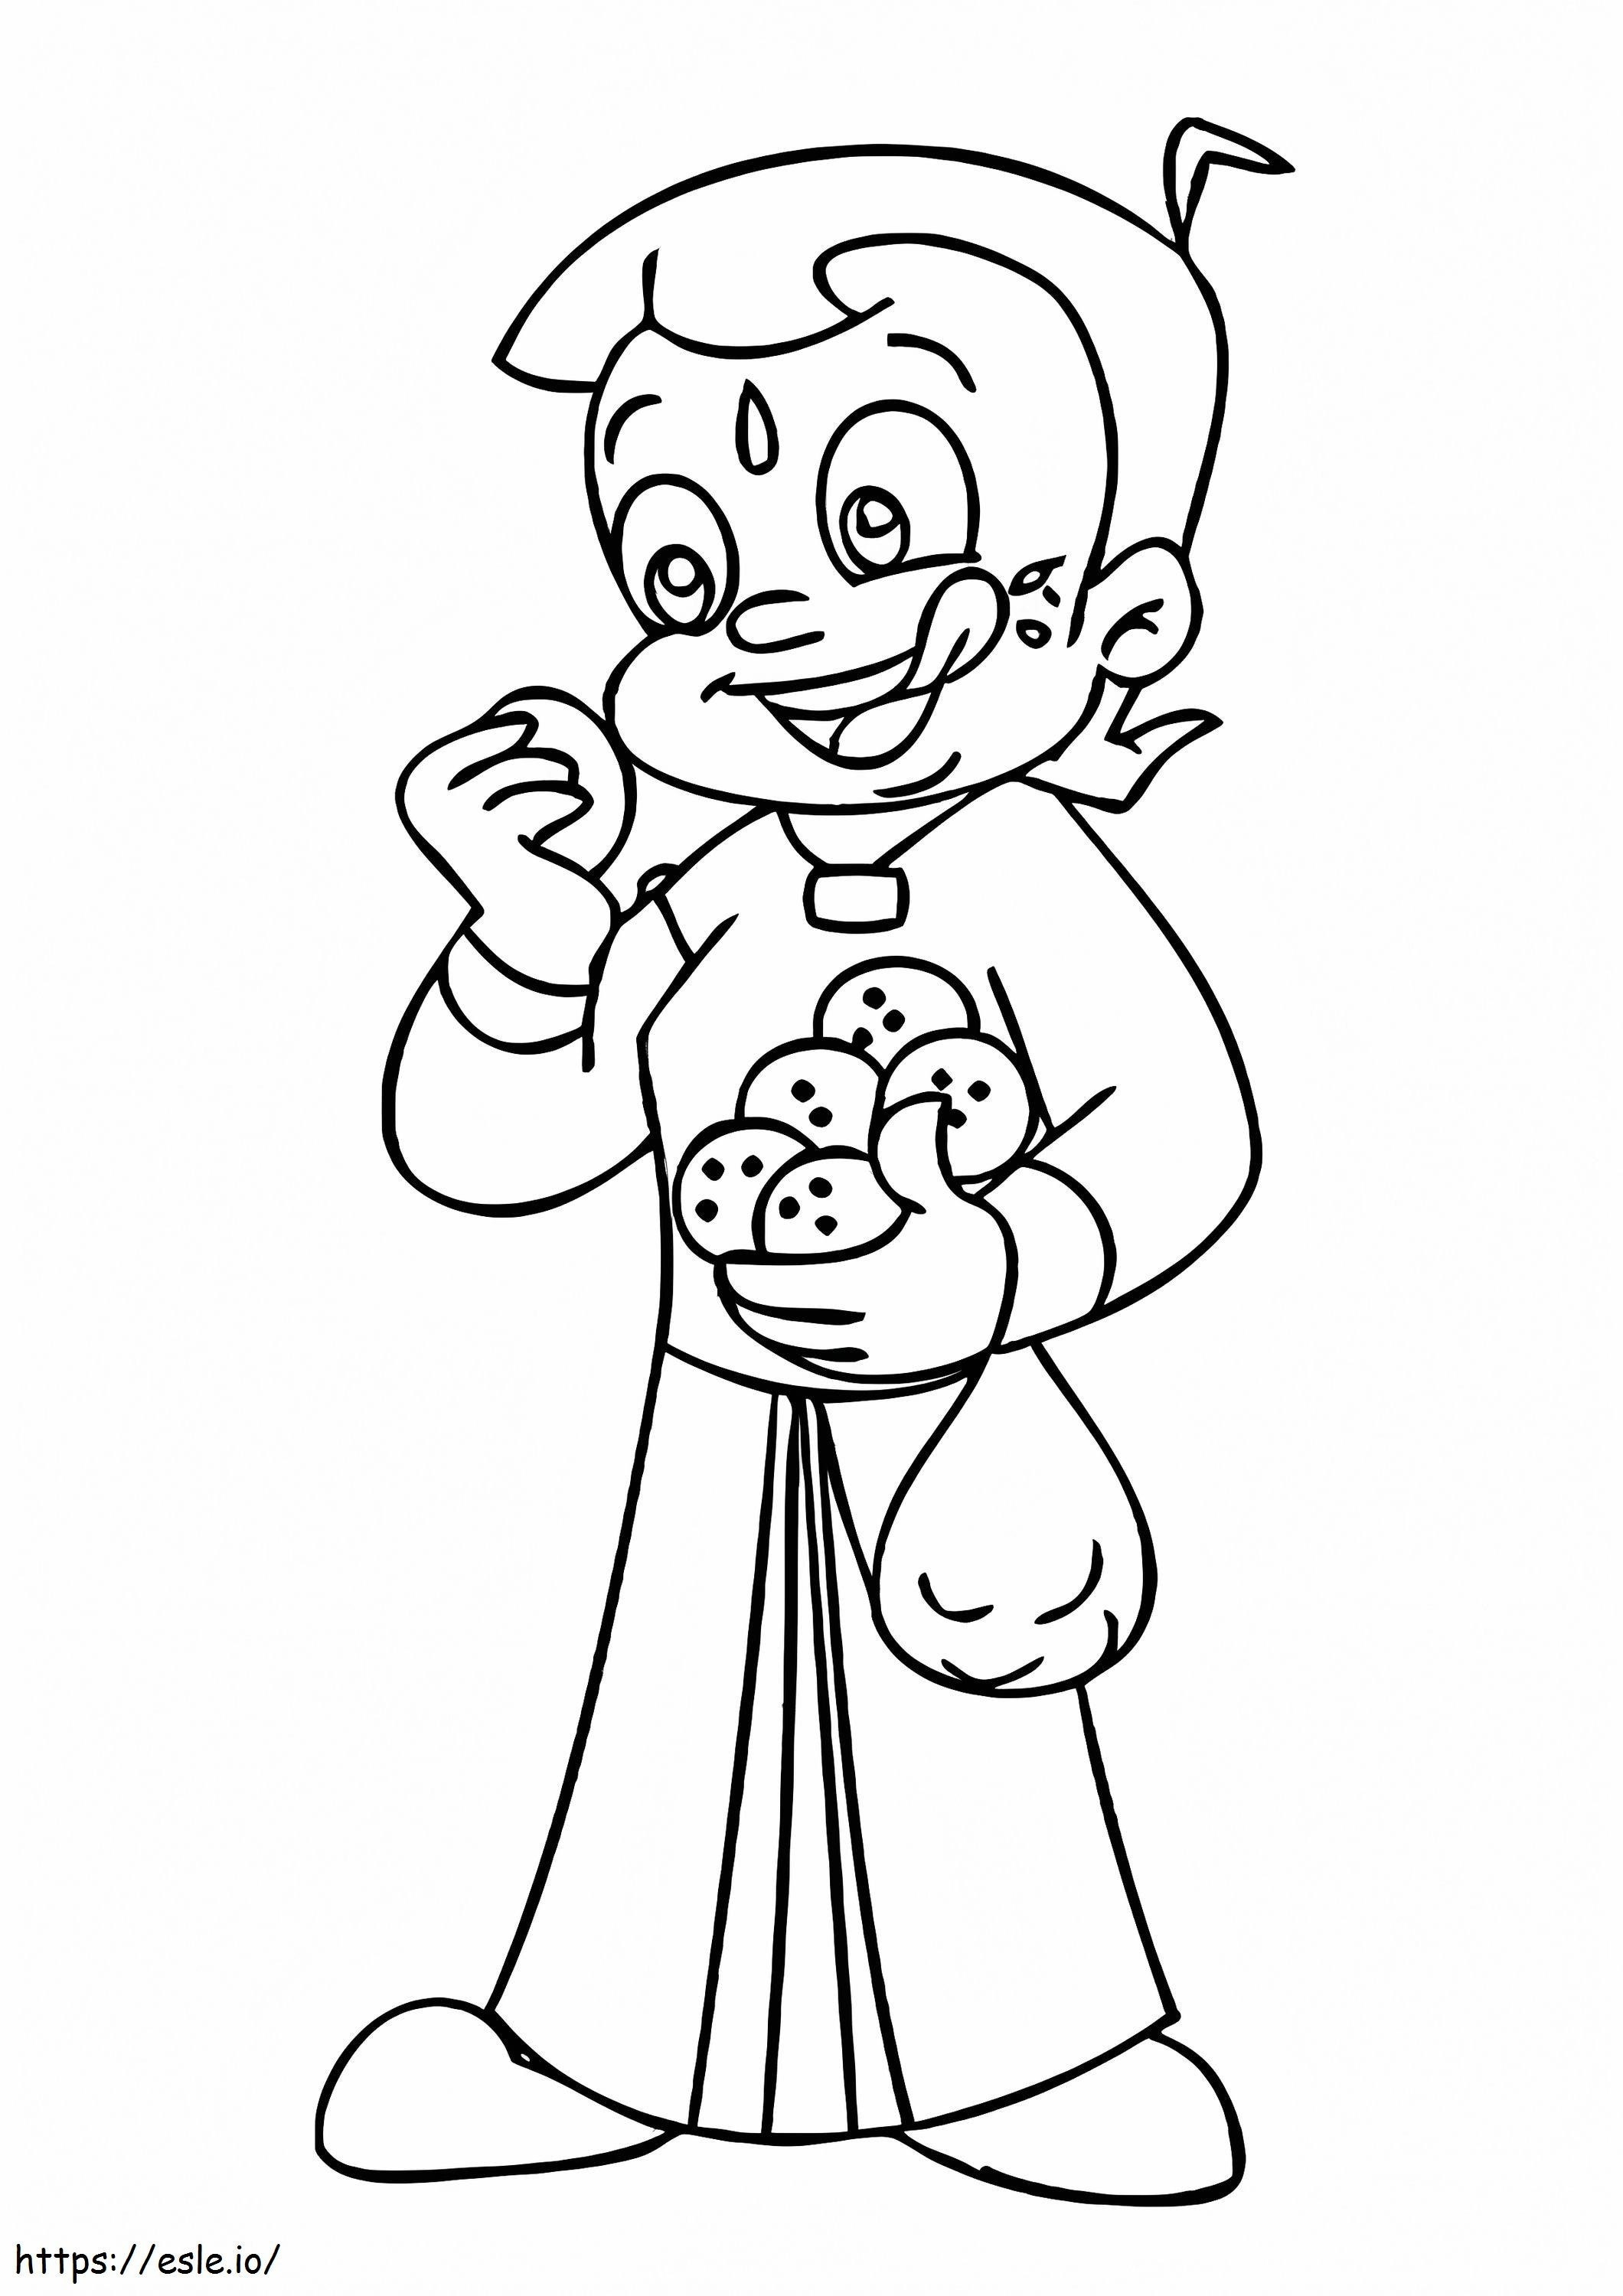 1526908580 Bheem The Ladoo Lover A4 coloring page